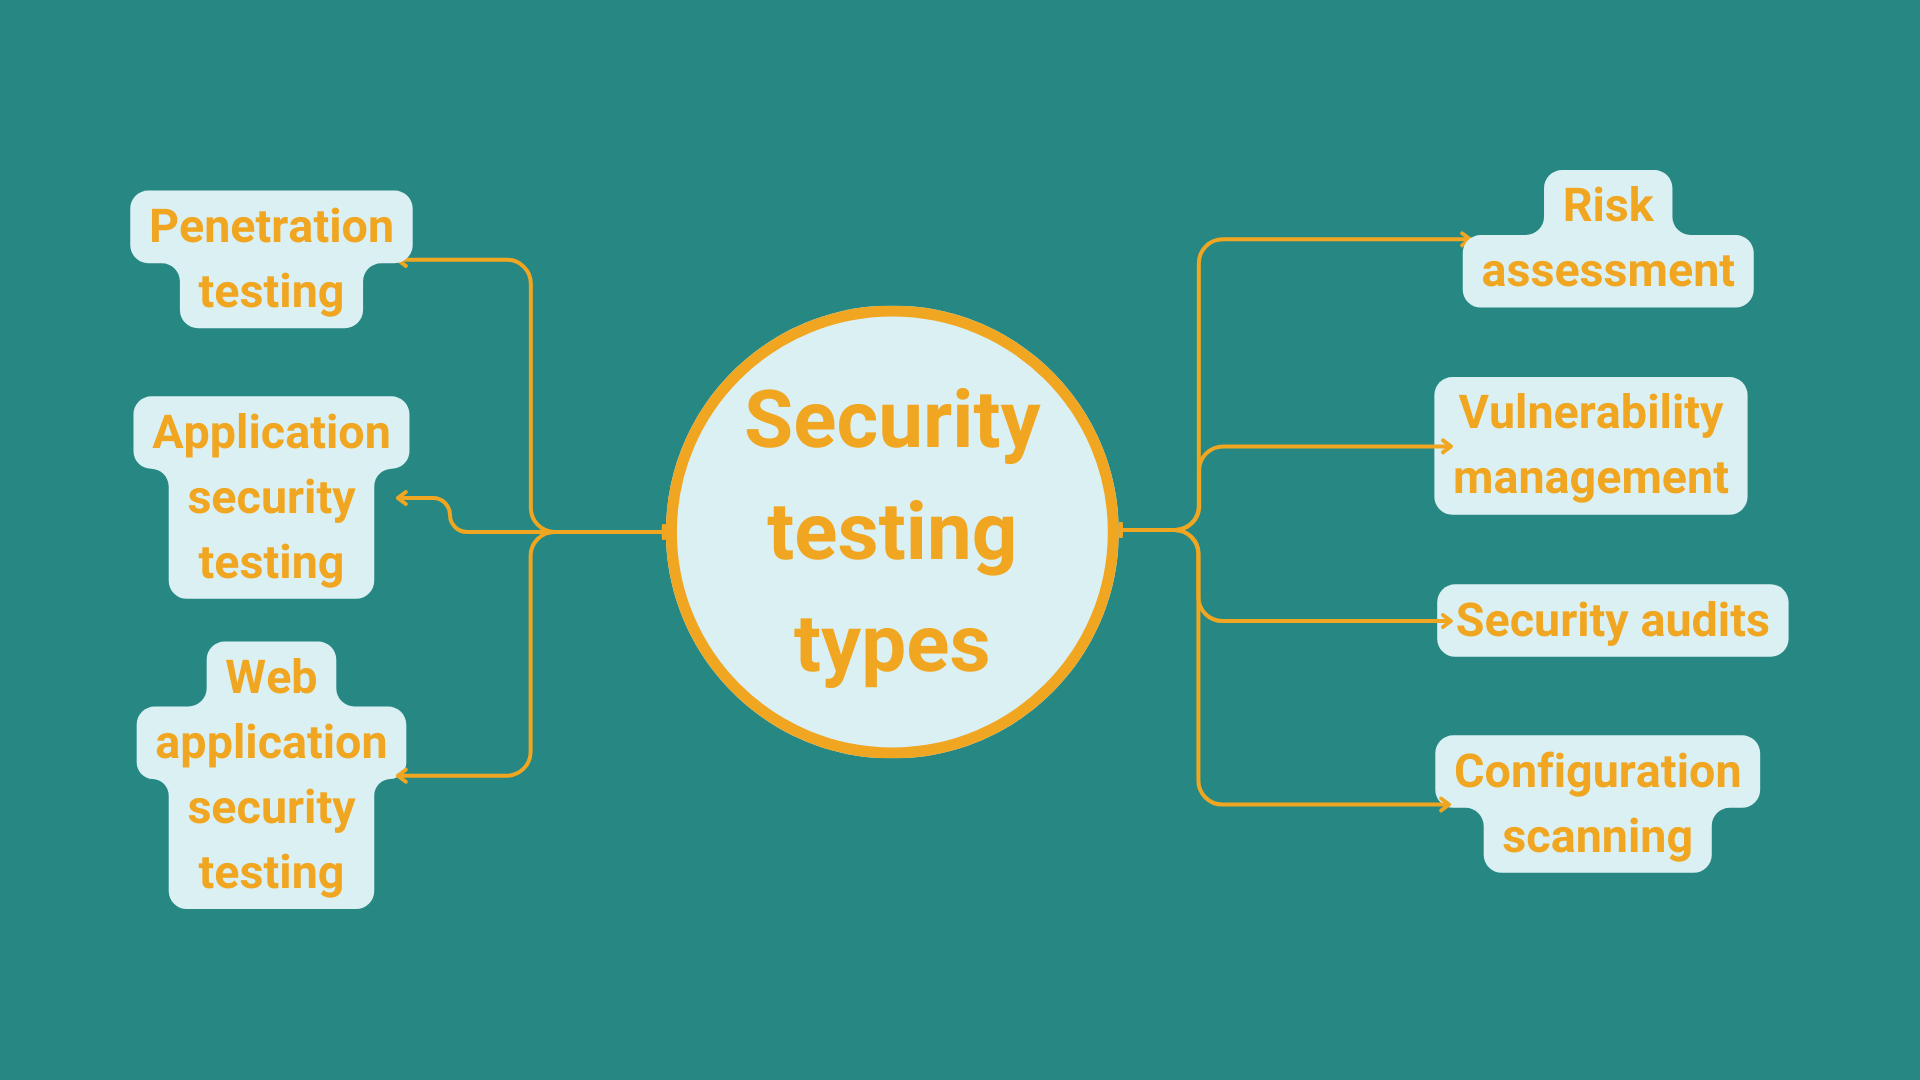 Types of security testing